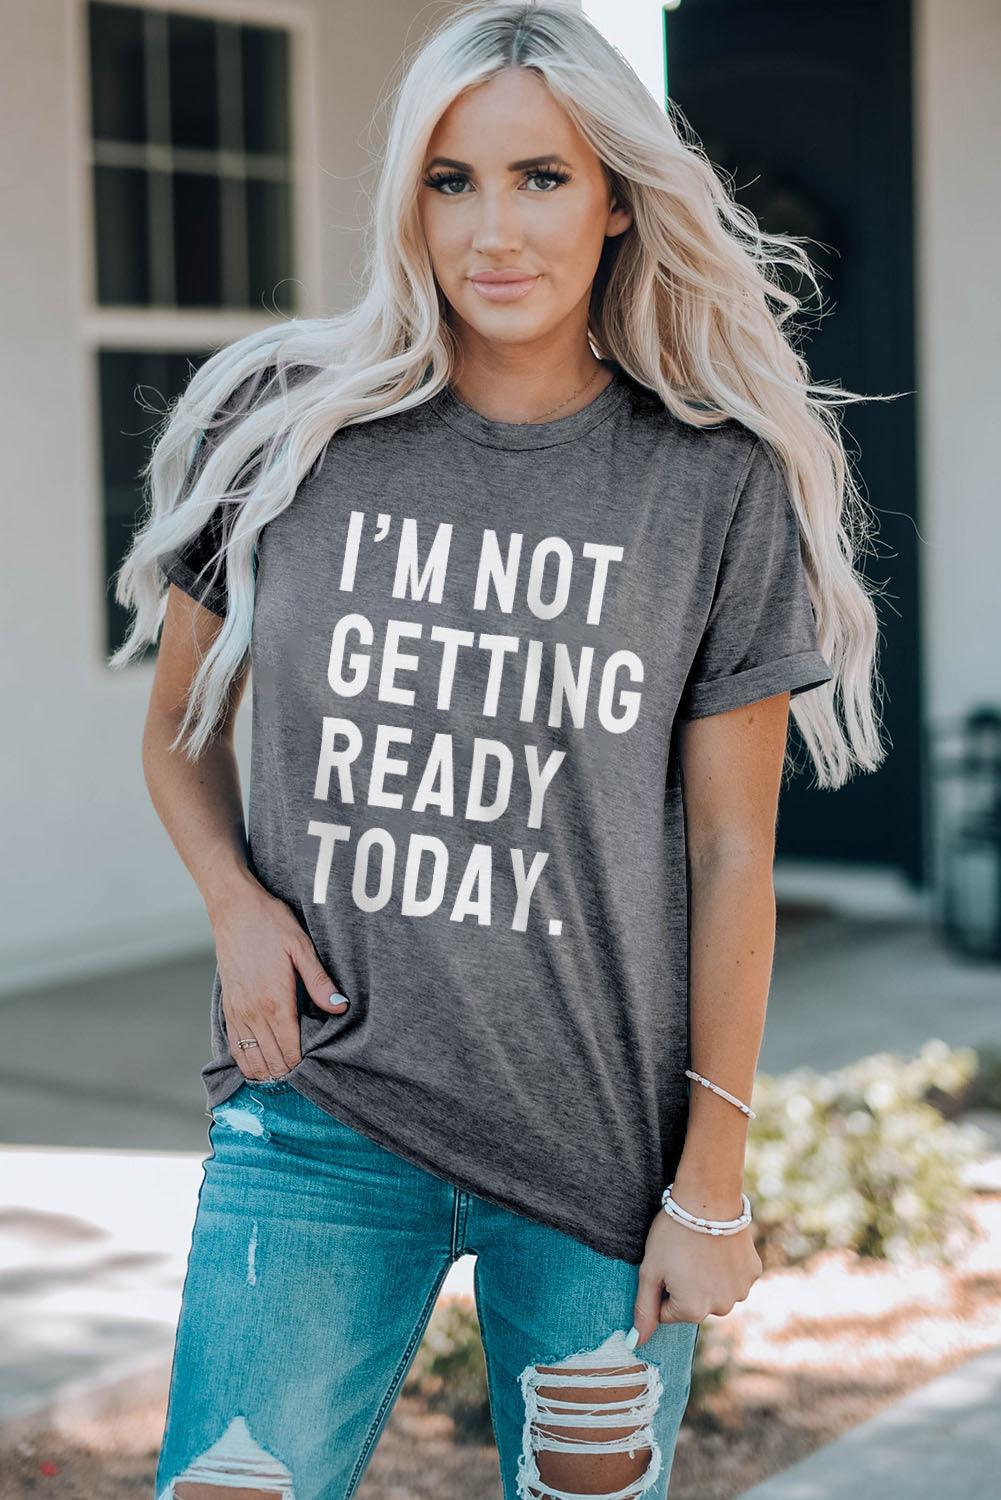 I'M NOT GETTING READY TODAY Graphic Tee - Flyclothing LLC